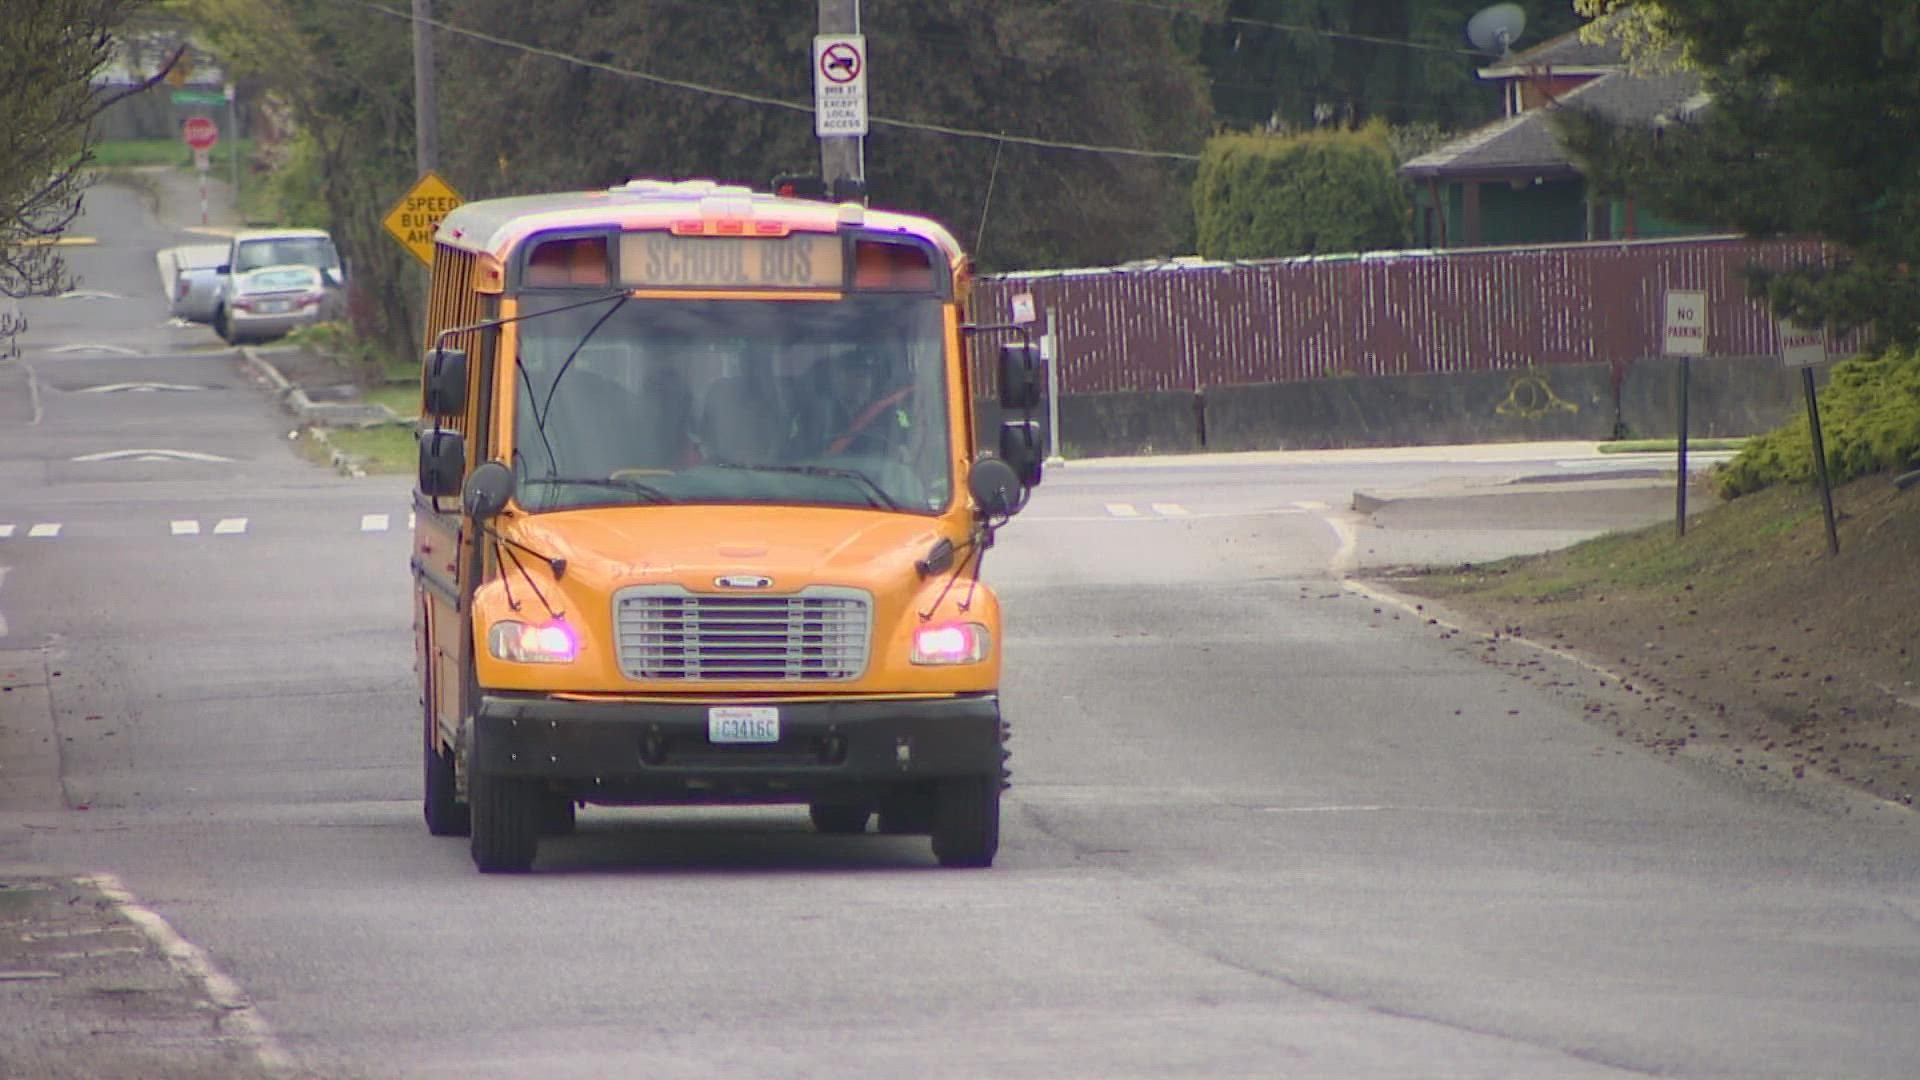 The district is contracting with two private companies to provide bus services, but neither company is fully staffed.